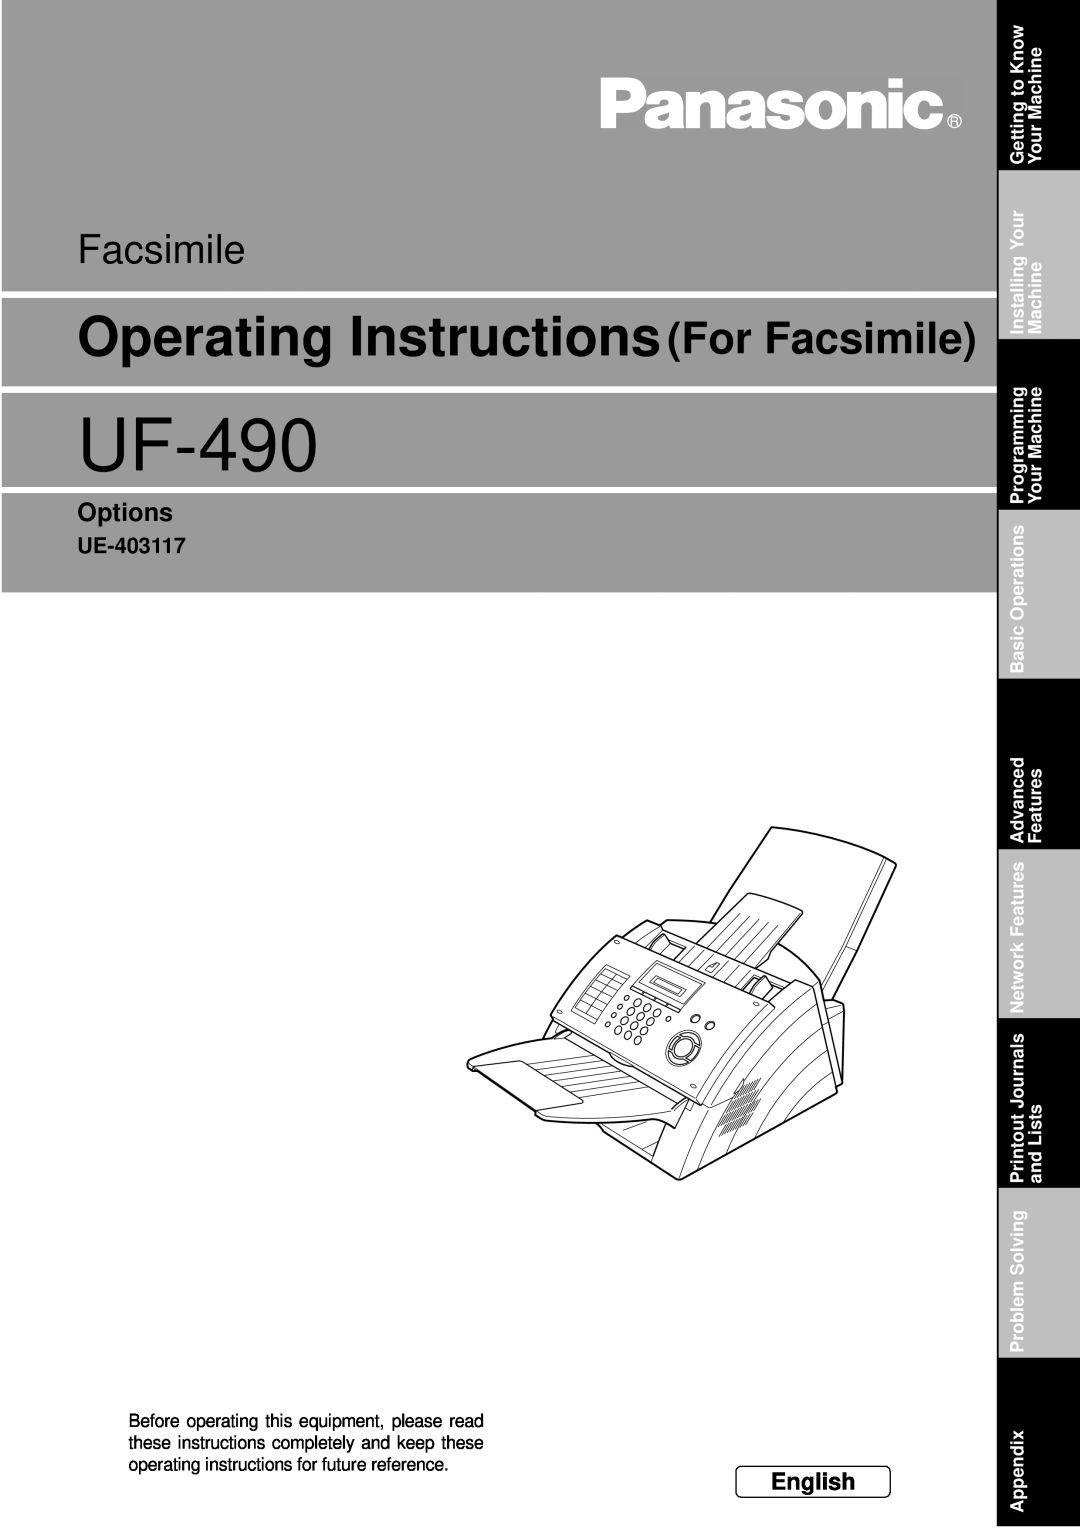 Castelle UF-490 appendix Operating Instructions For Facsimile, Options, English 